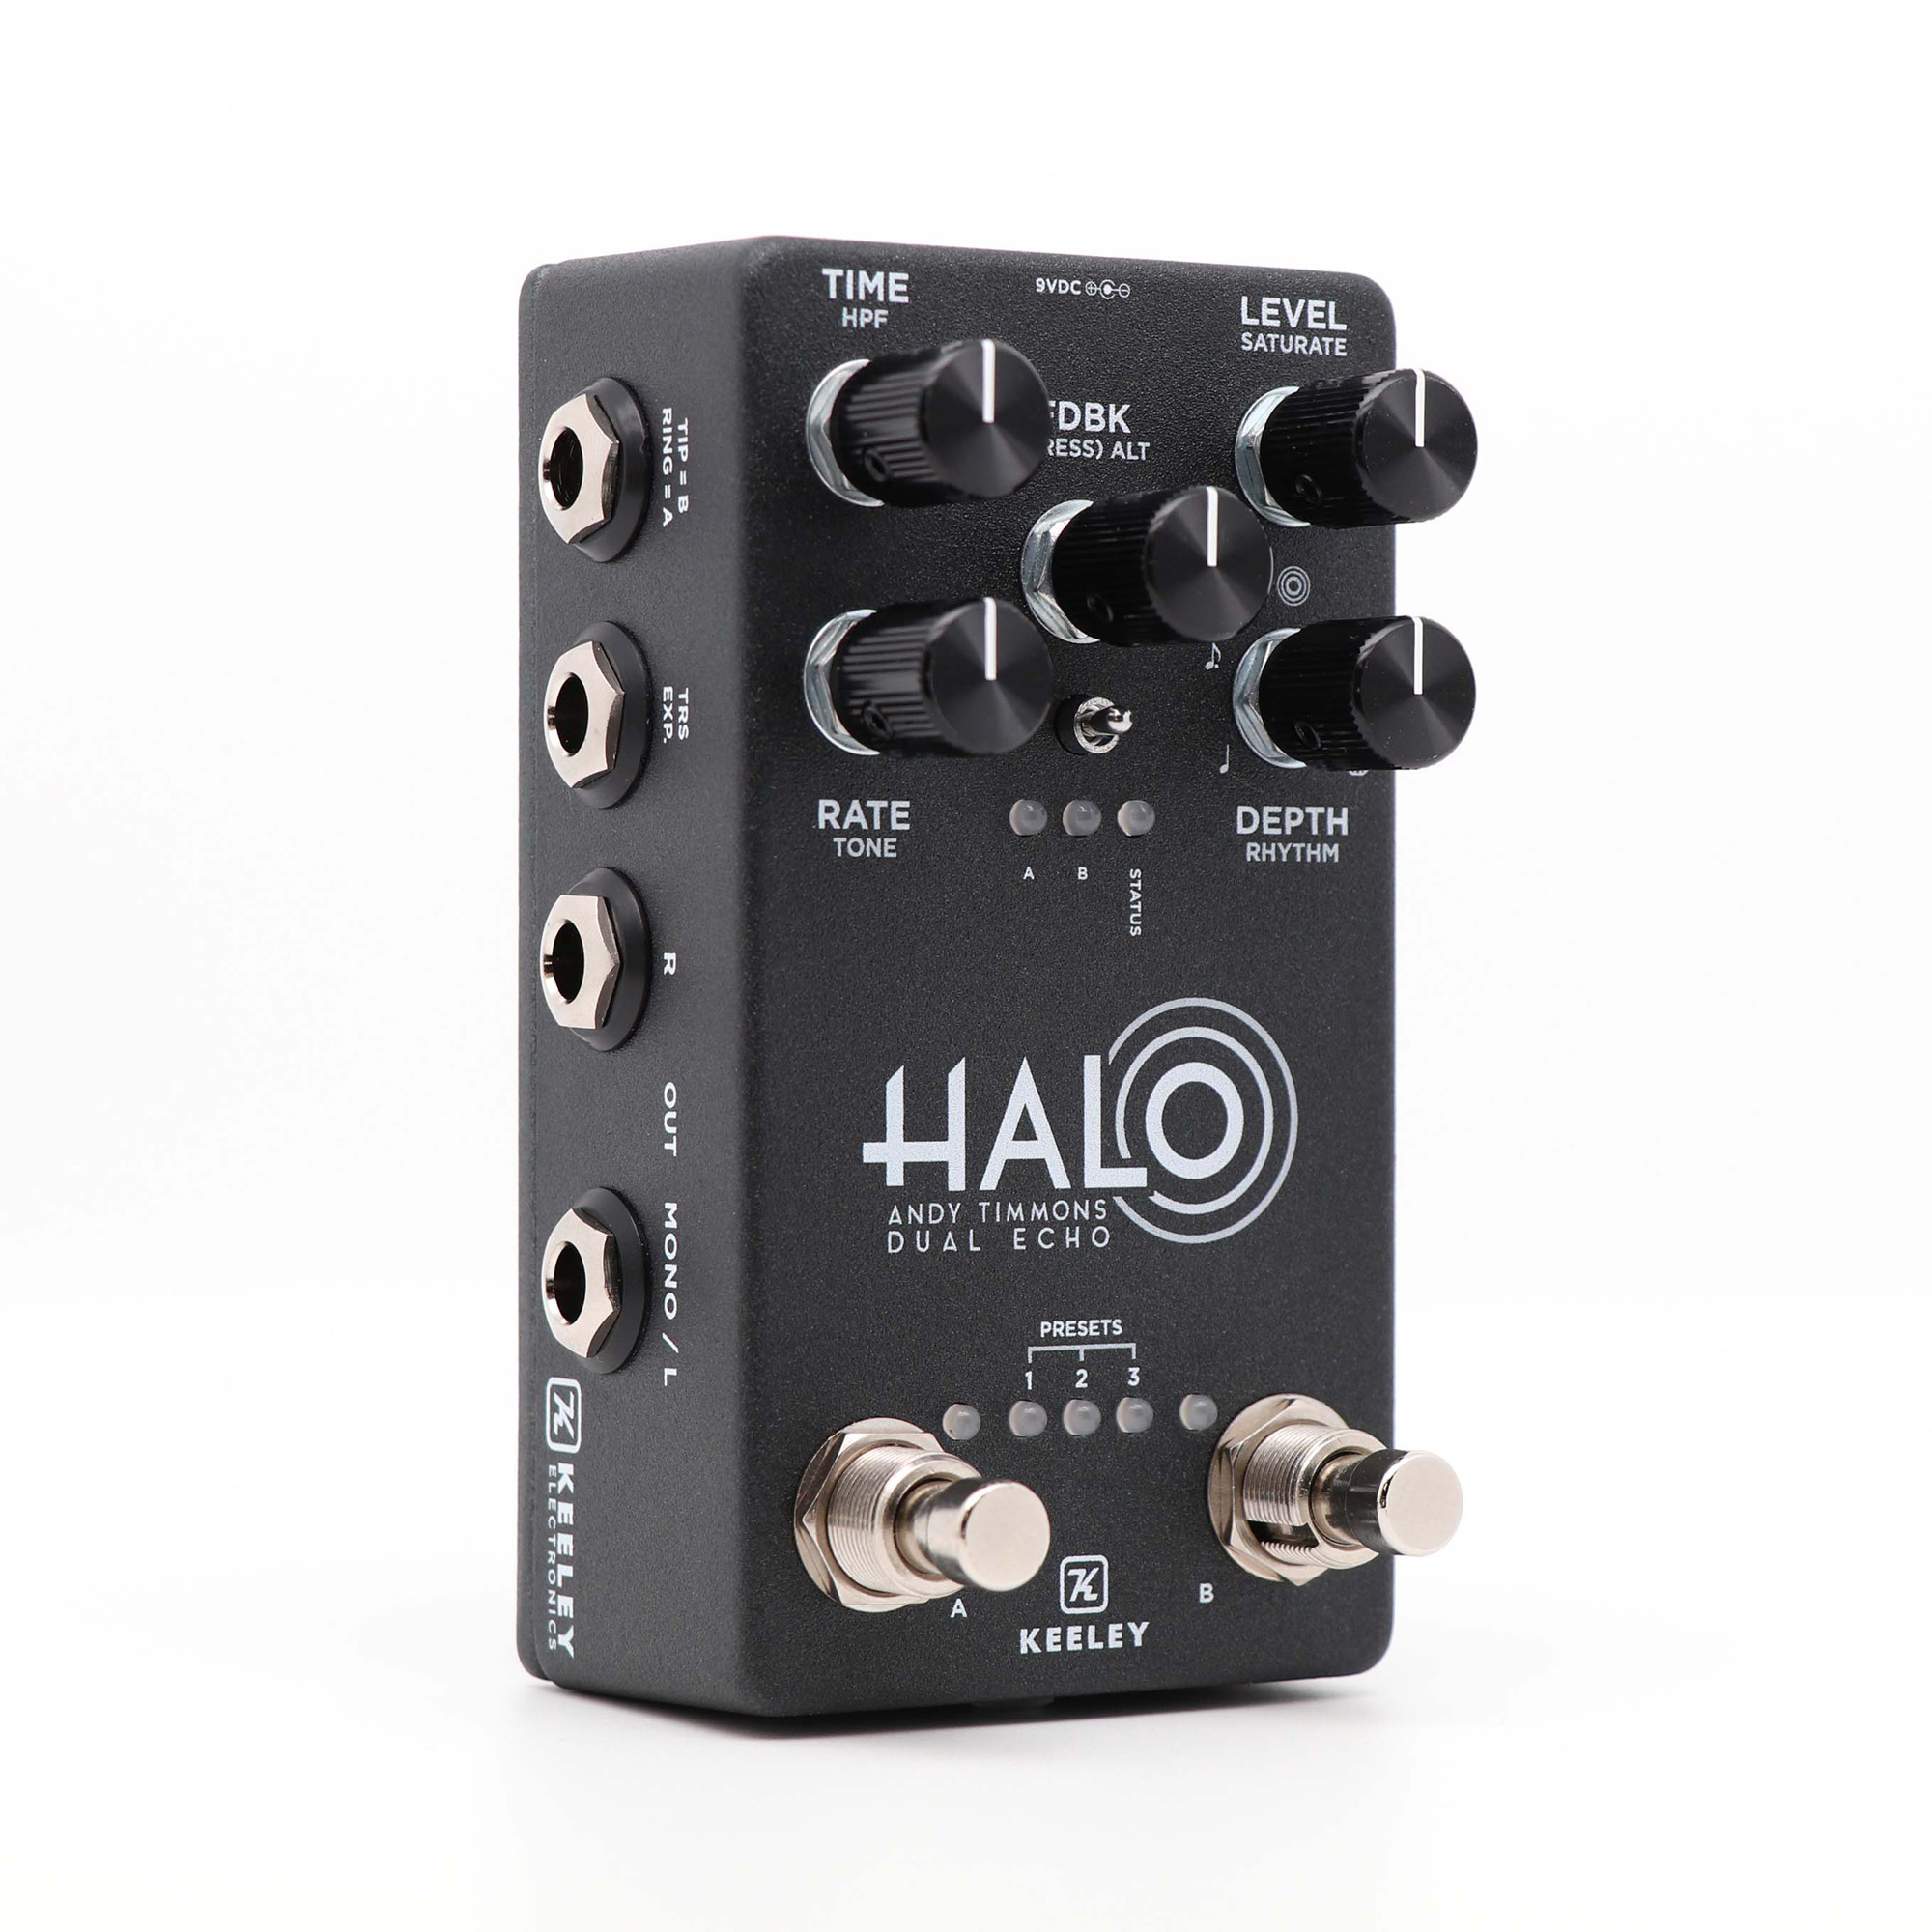 Keeley  Electronics Halo Dual Echo Andy Timmons Signature - Reverb/Delay/Echo Effektpedal - Variation 1